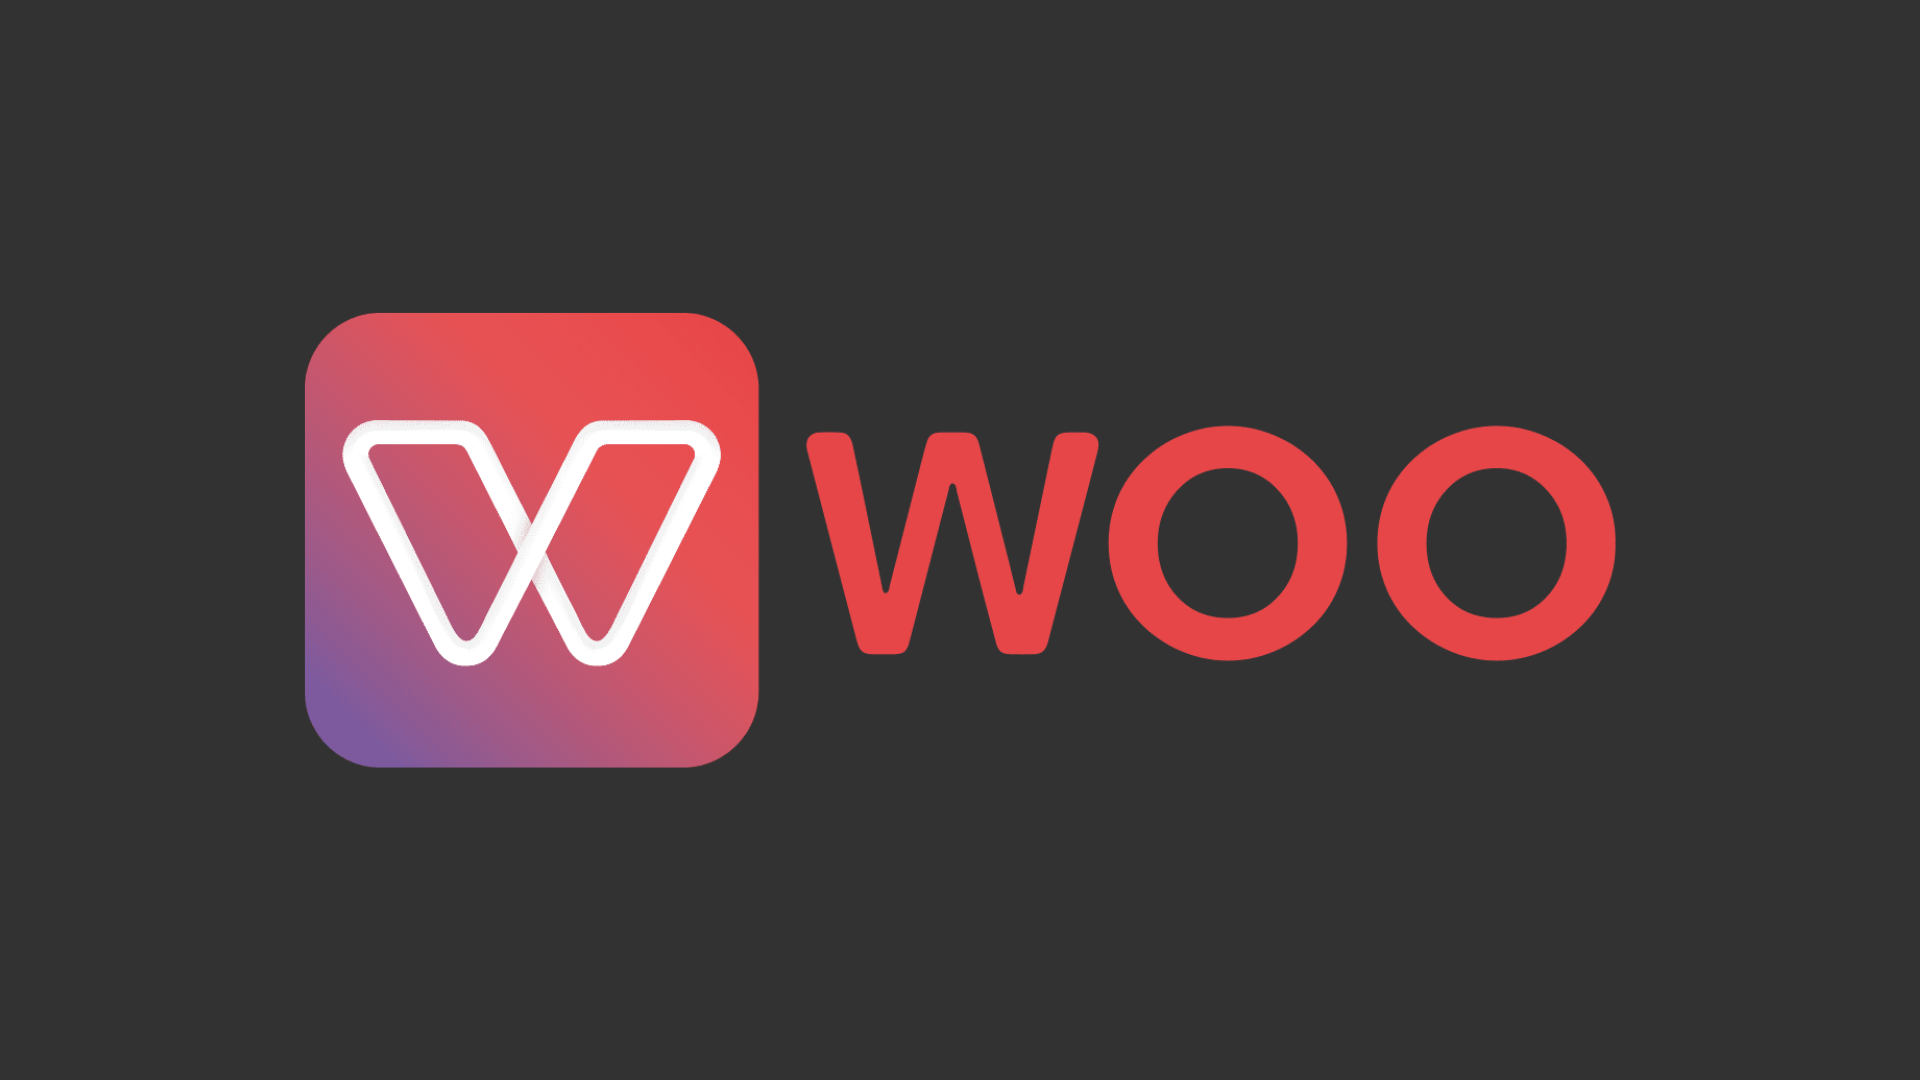 Dating app development from scratch by Addevice | Woo